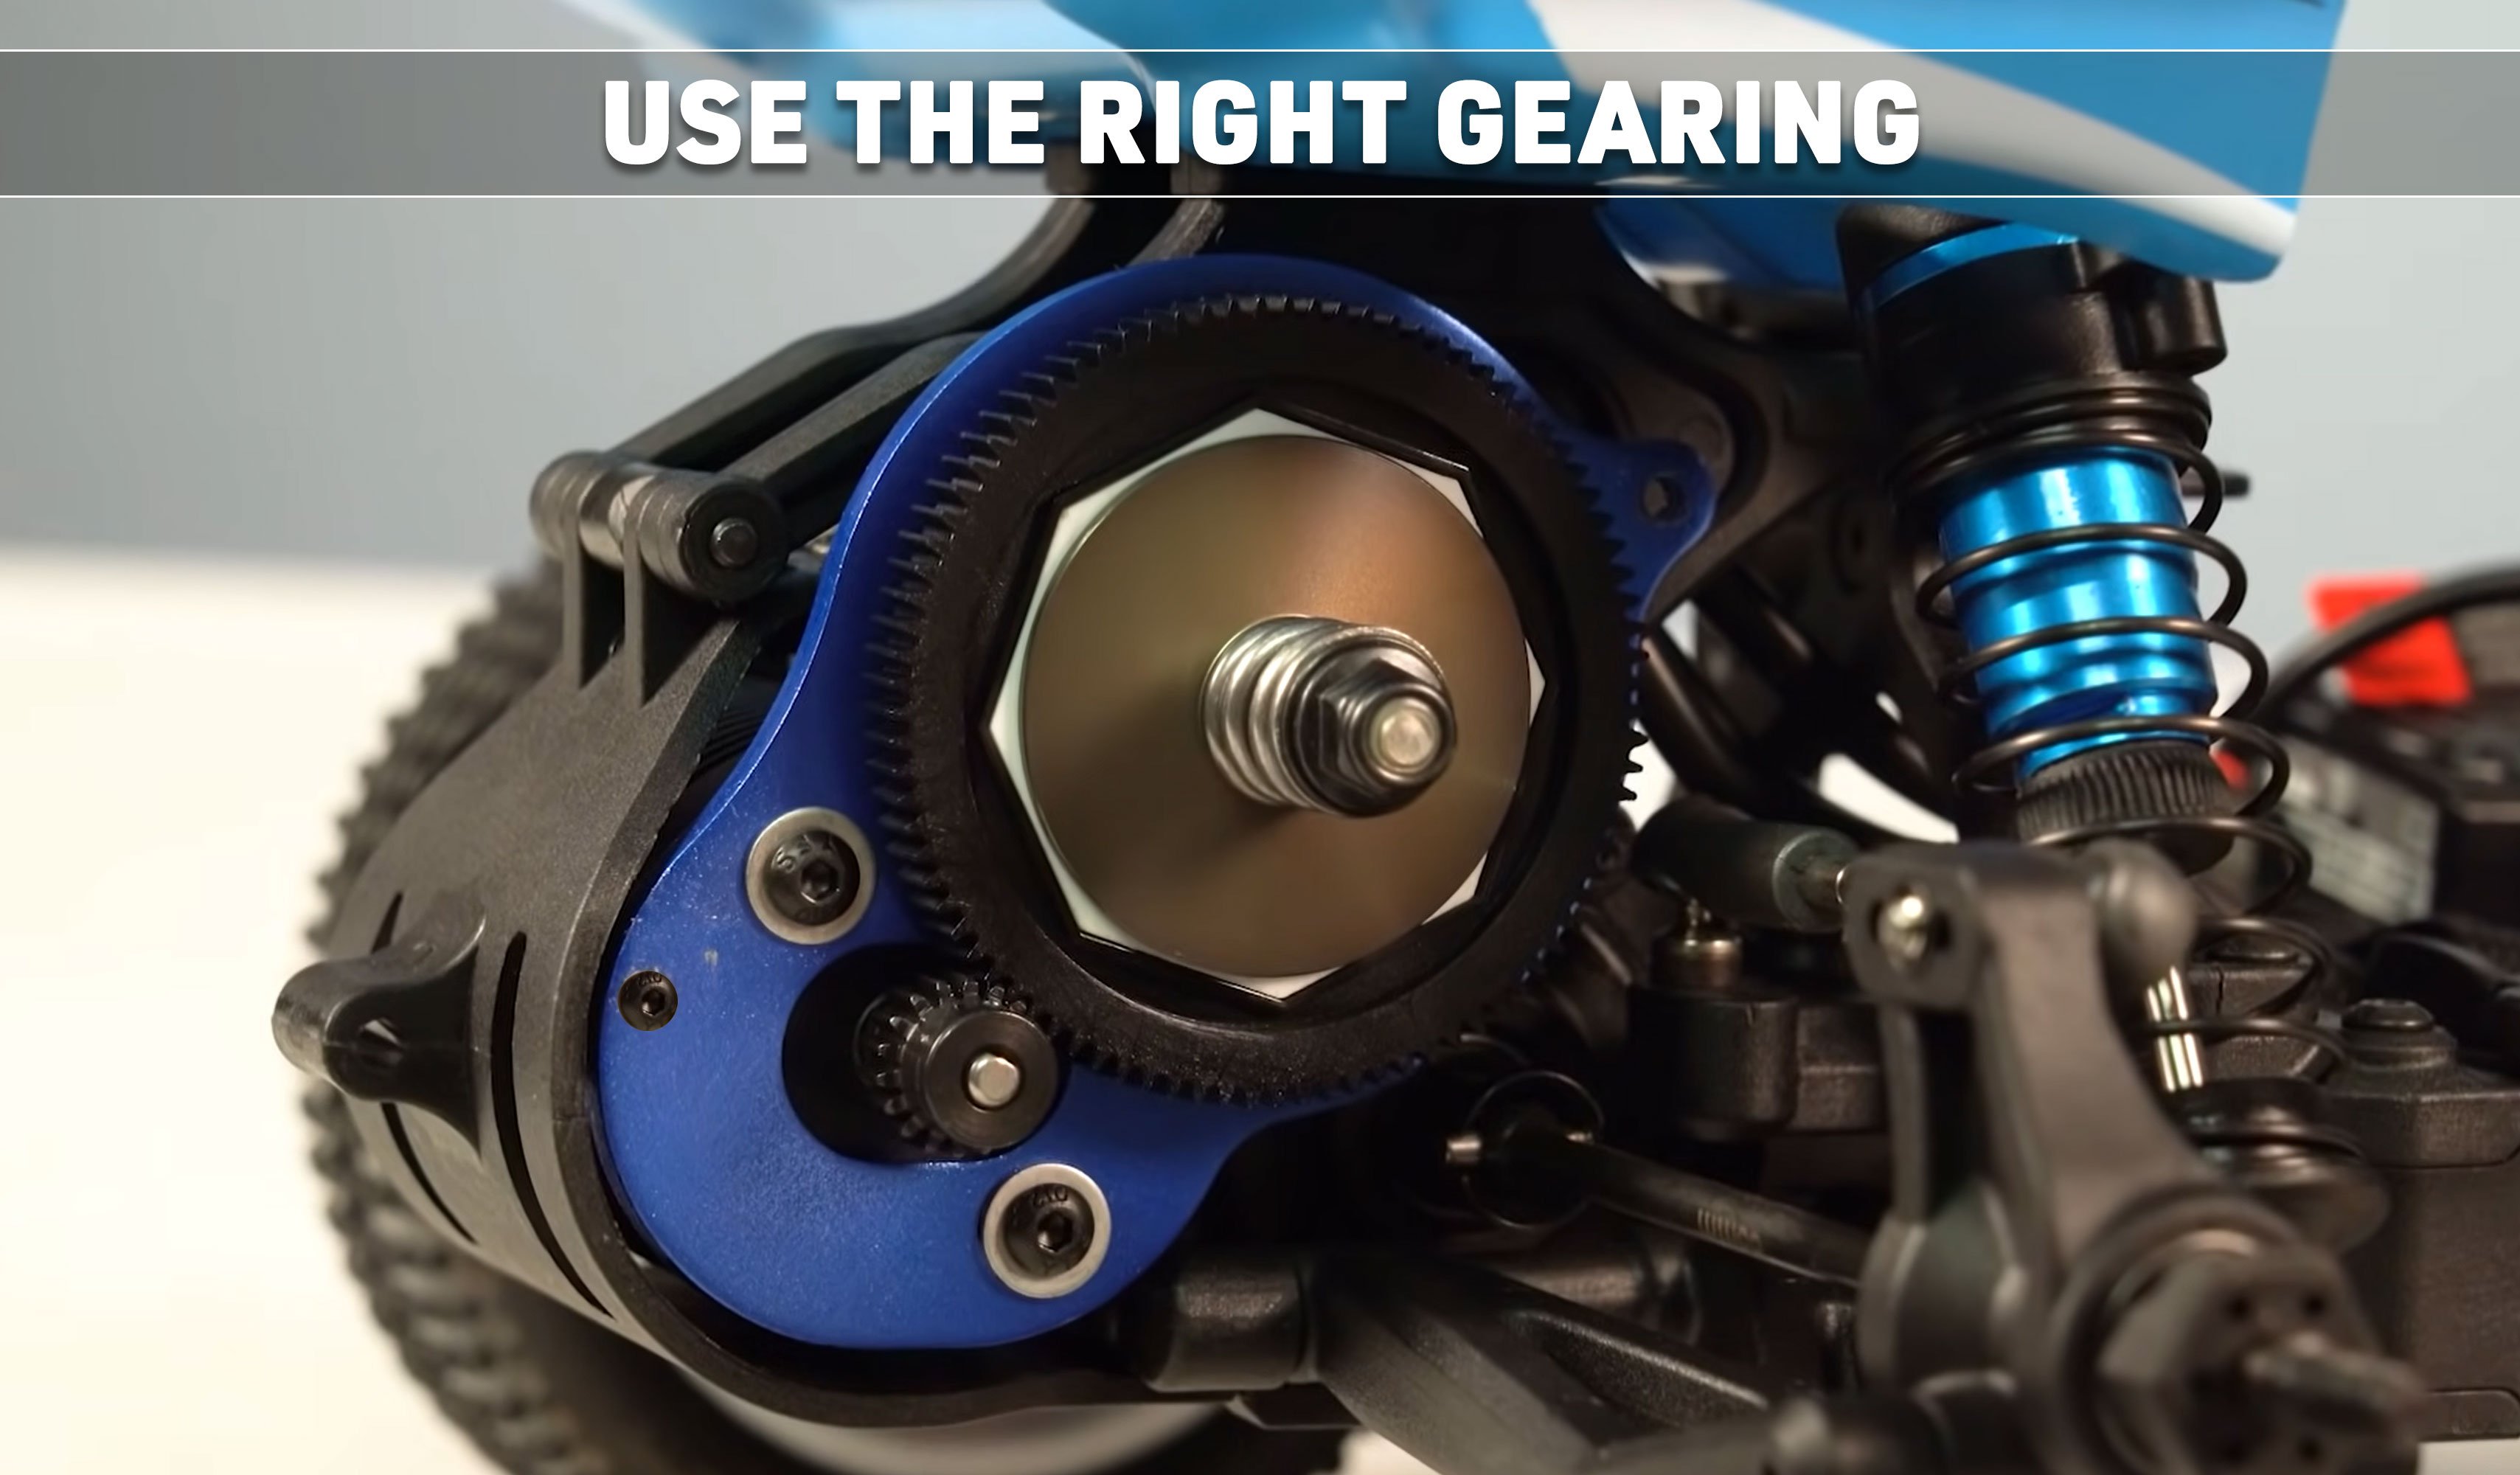 Use the Right Gearing